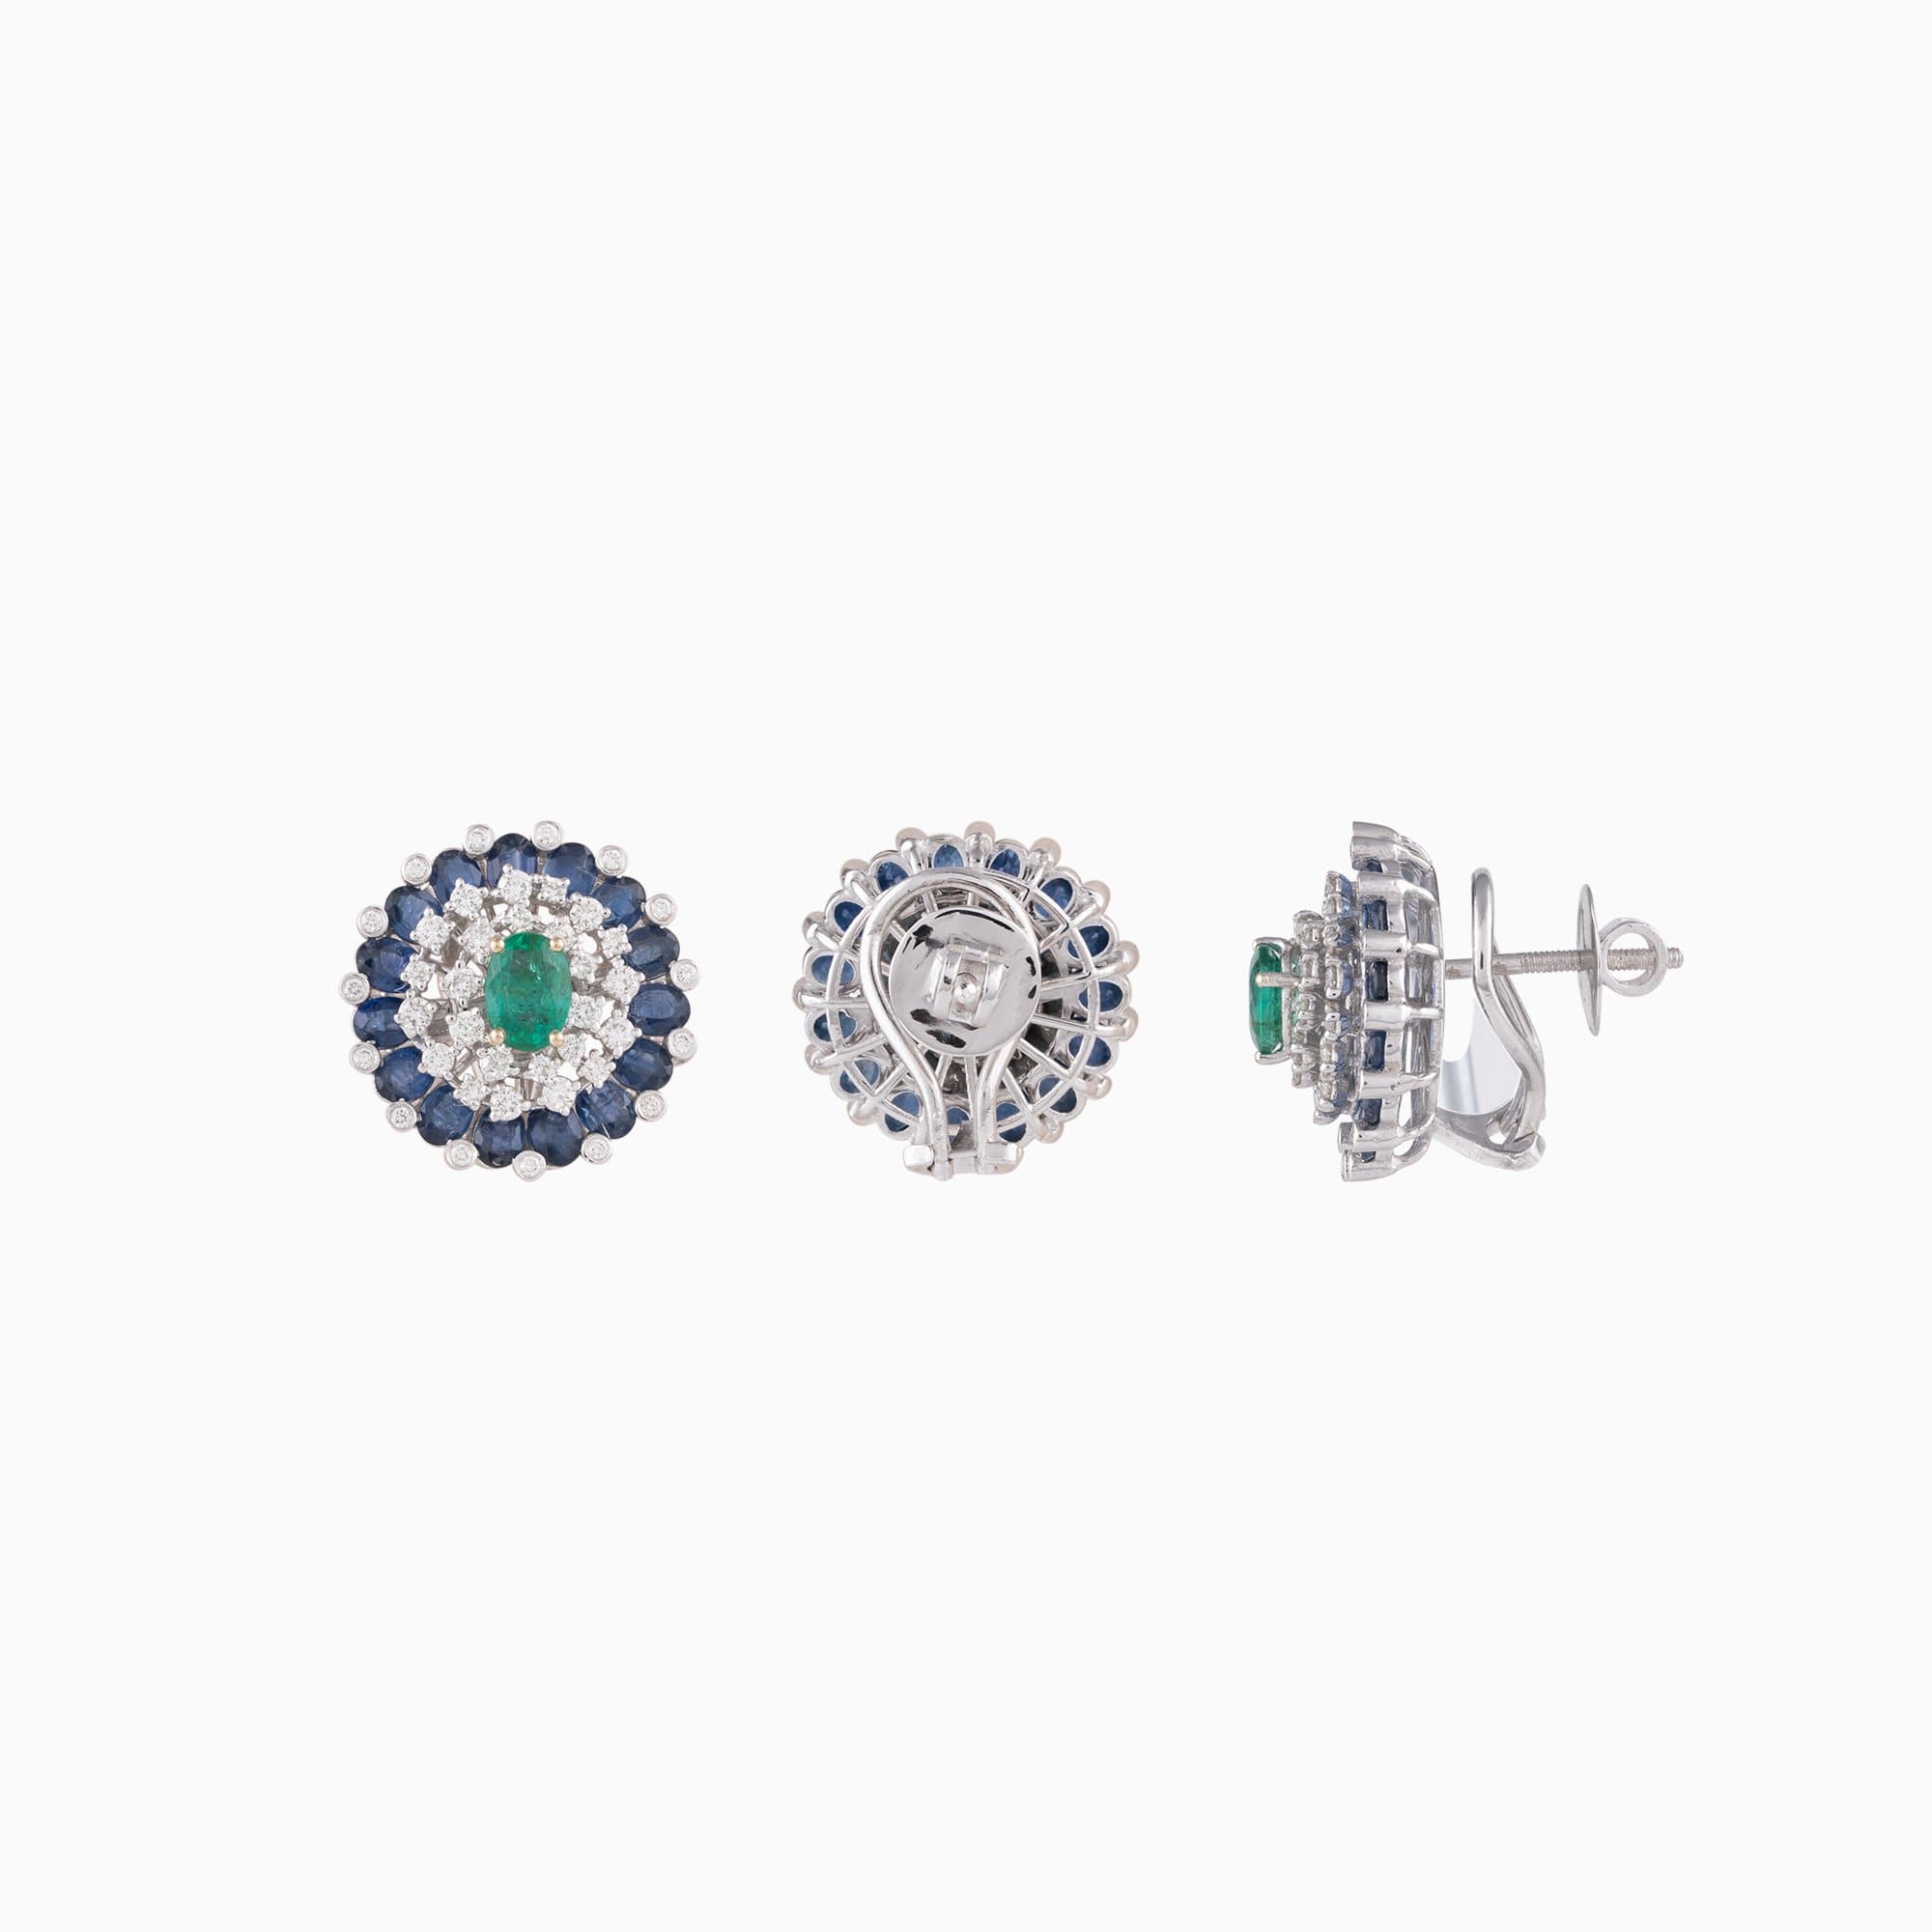 Earring Pair with Round Cut Diamond, Emerald c/st and Sapphire Cut - PGDE0246